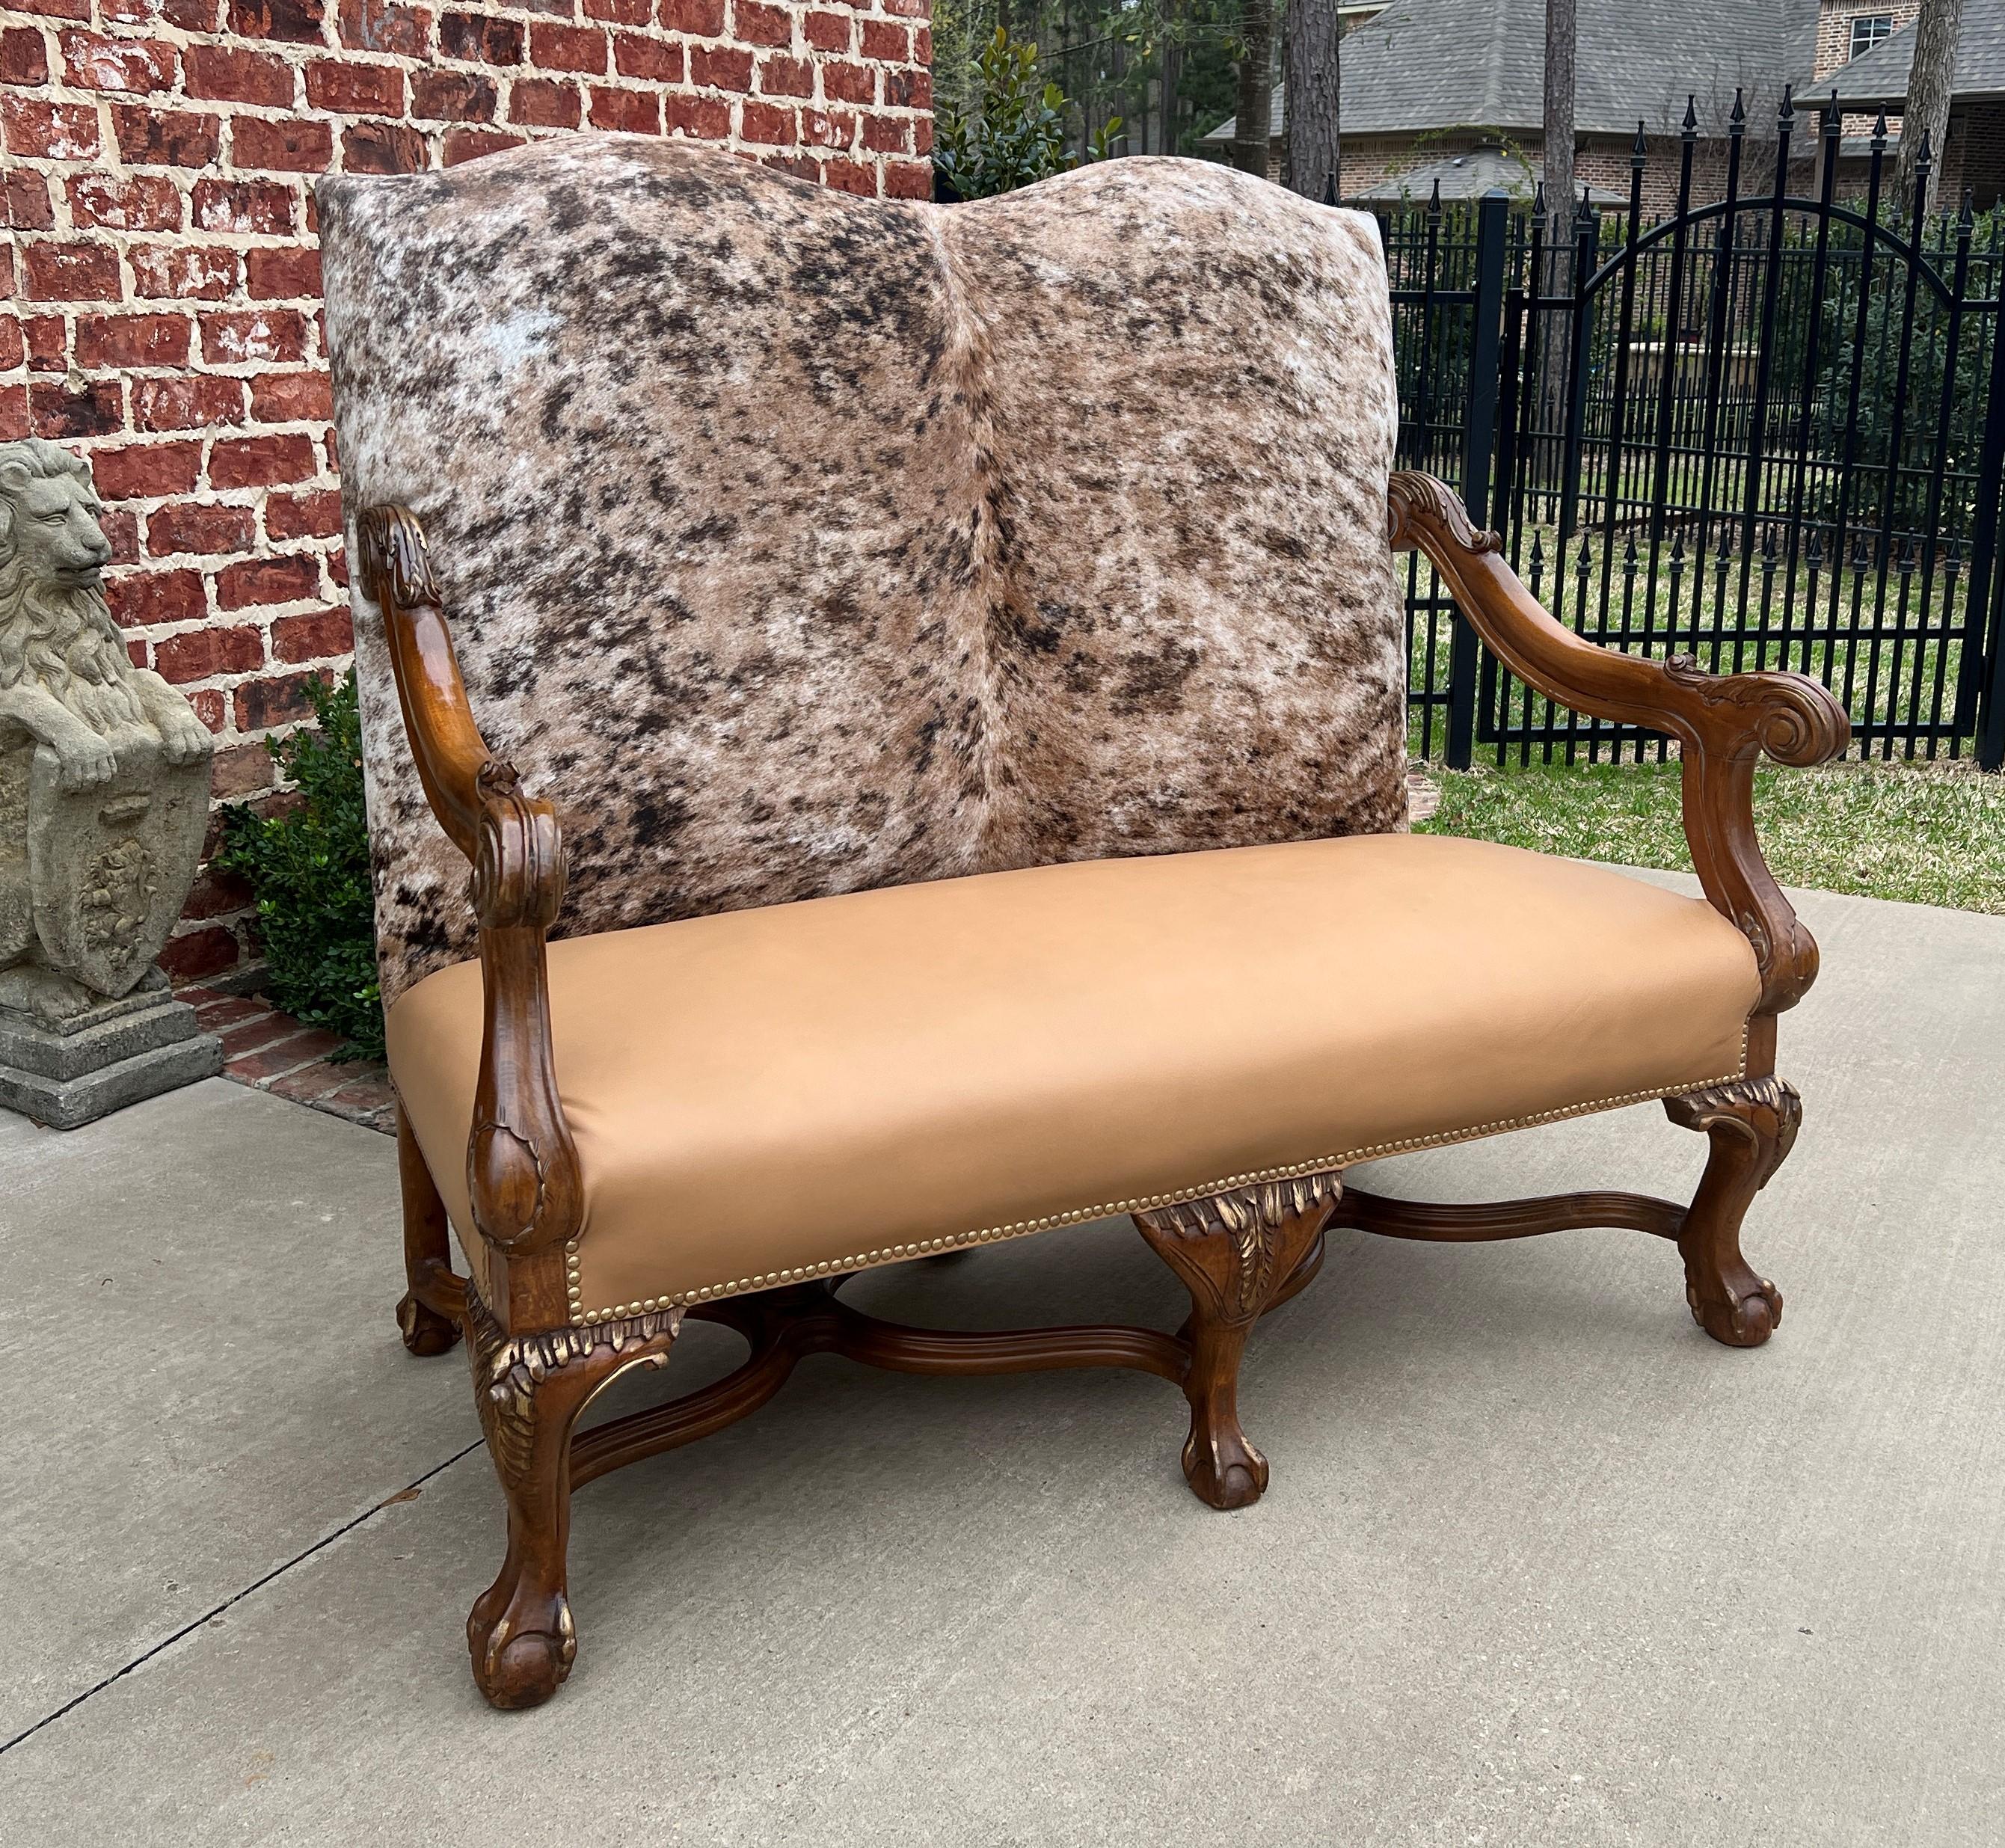 Country Antique Sofa Bench Settee Loveseat Chair Cowhide Walnut Western Farmhouse Lodge